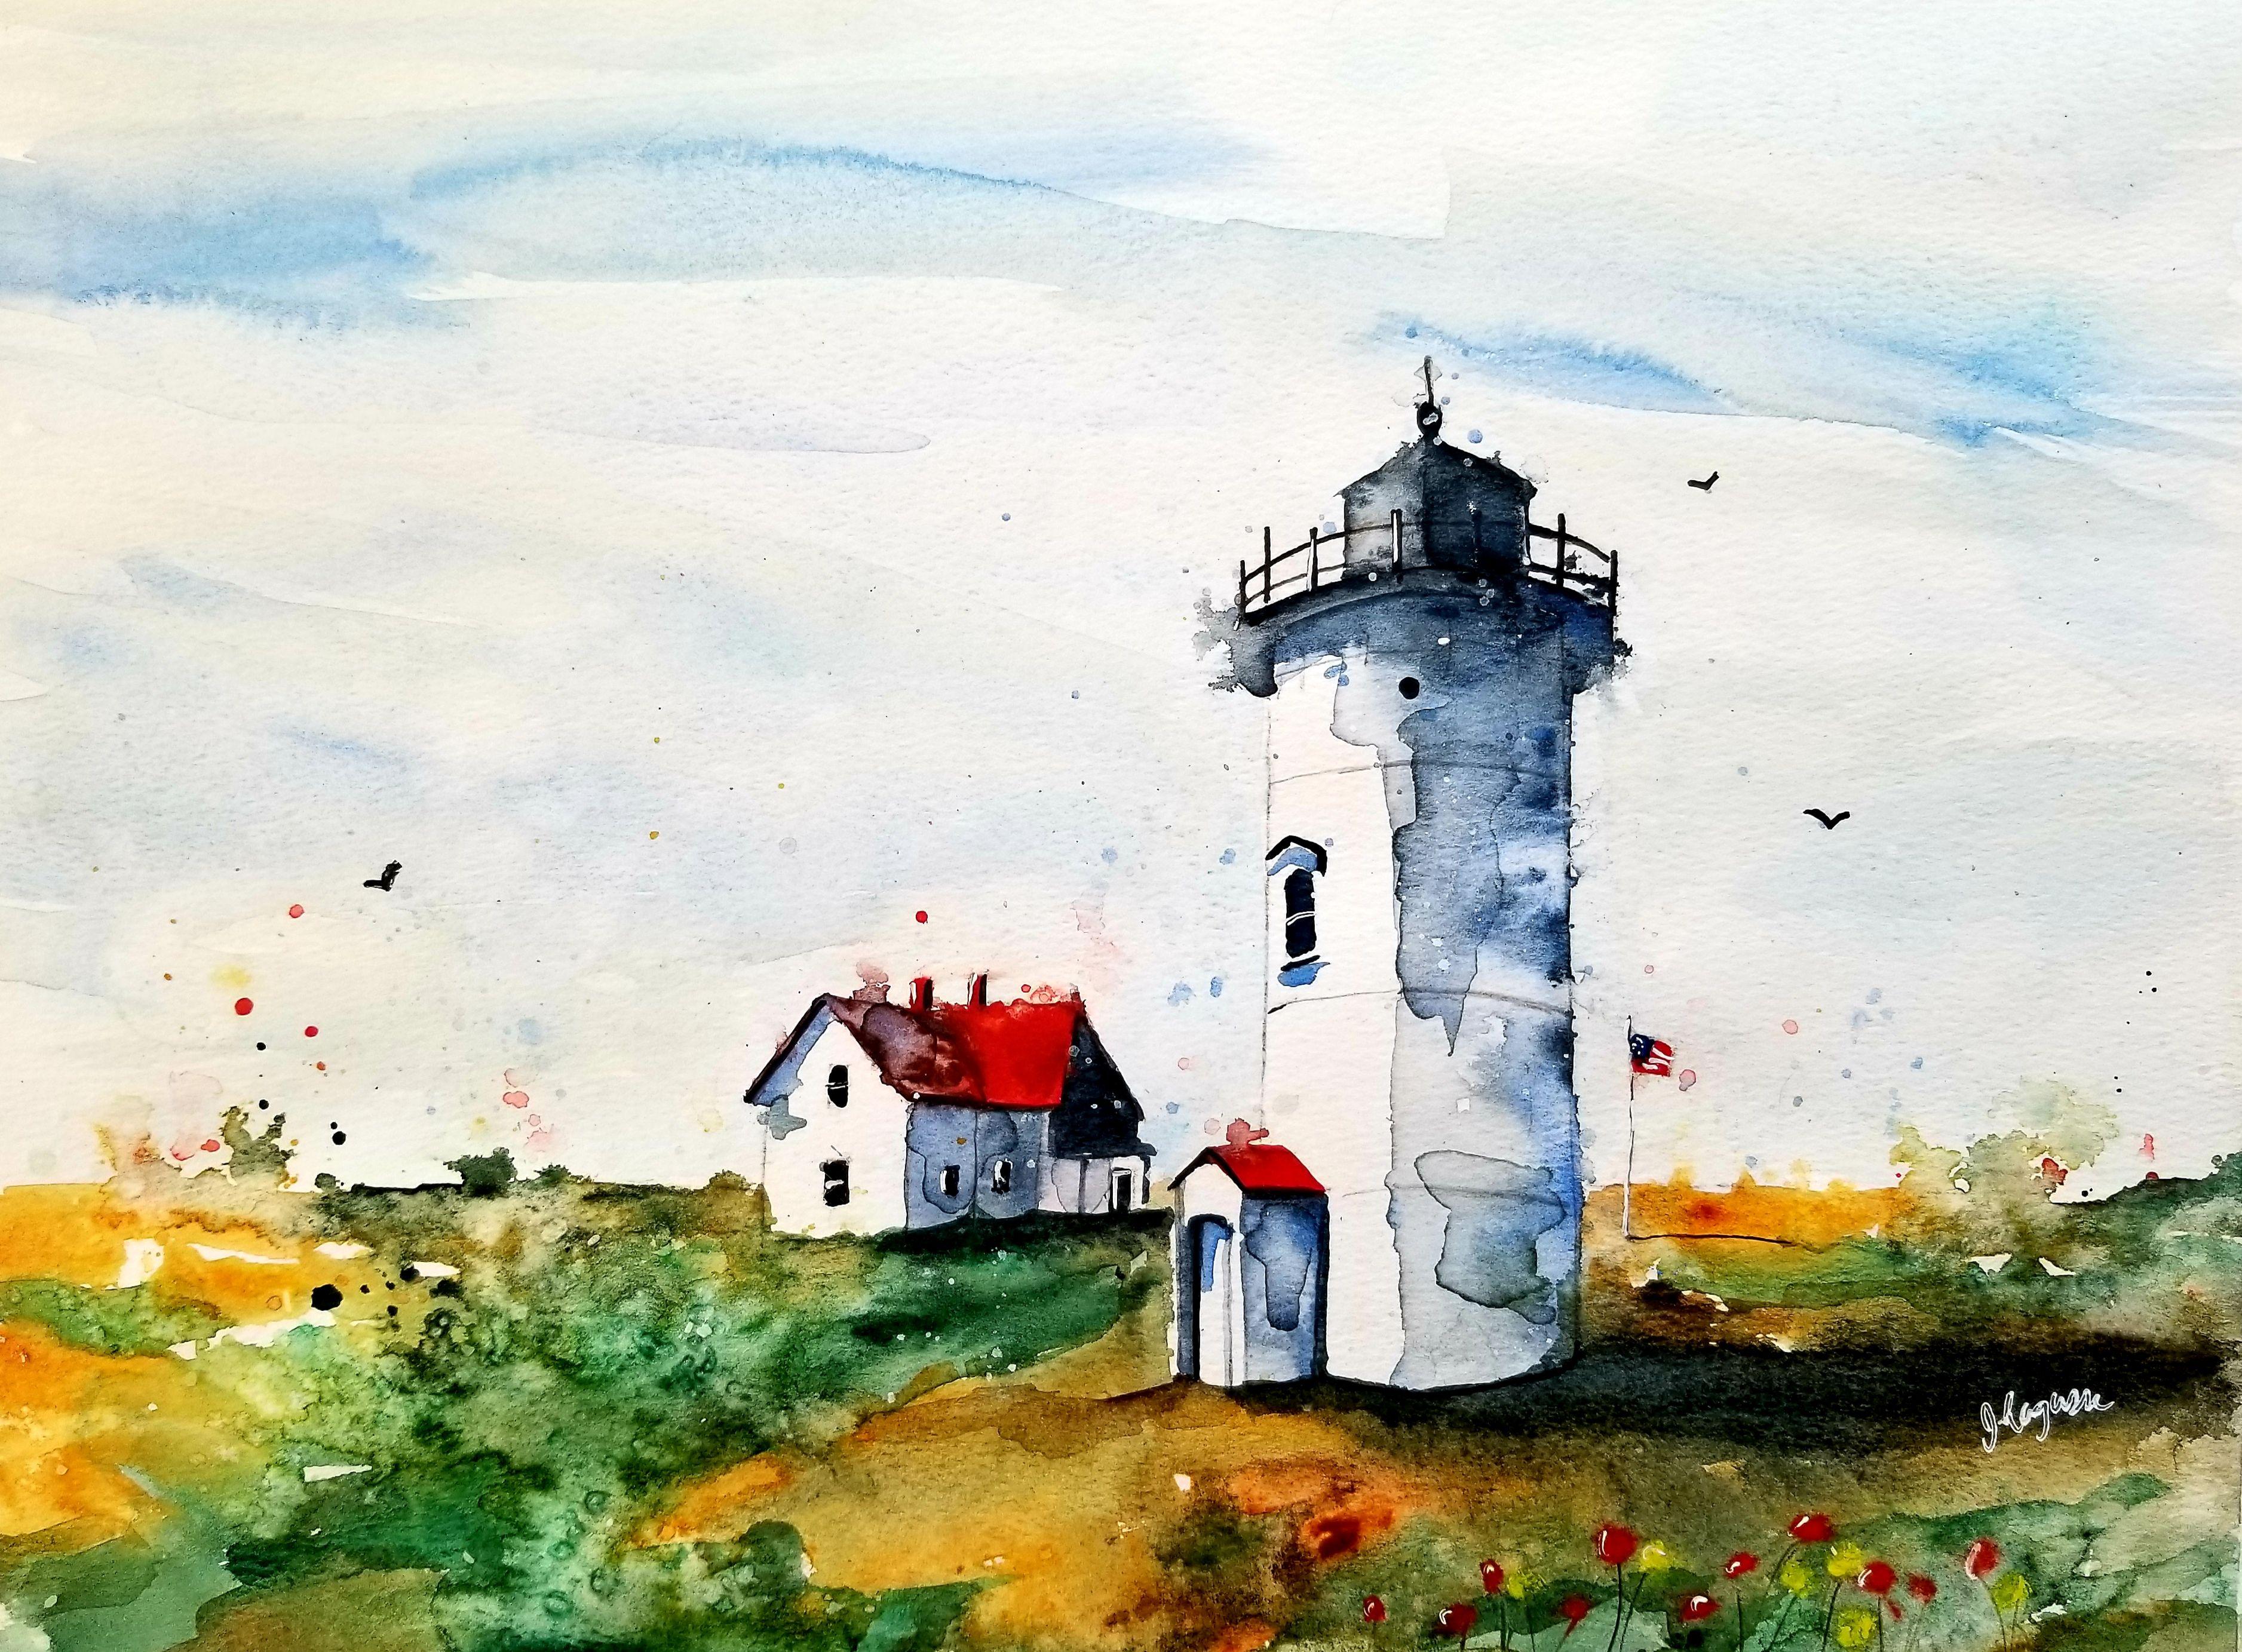 Lighthouse, Painting, Watercolor on Watercolor Paper - Art by Jim Lagasse